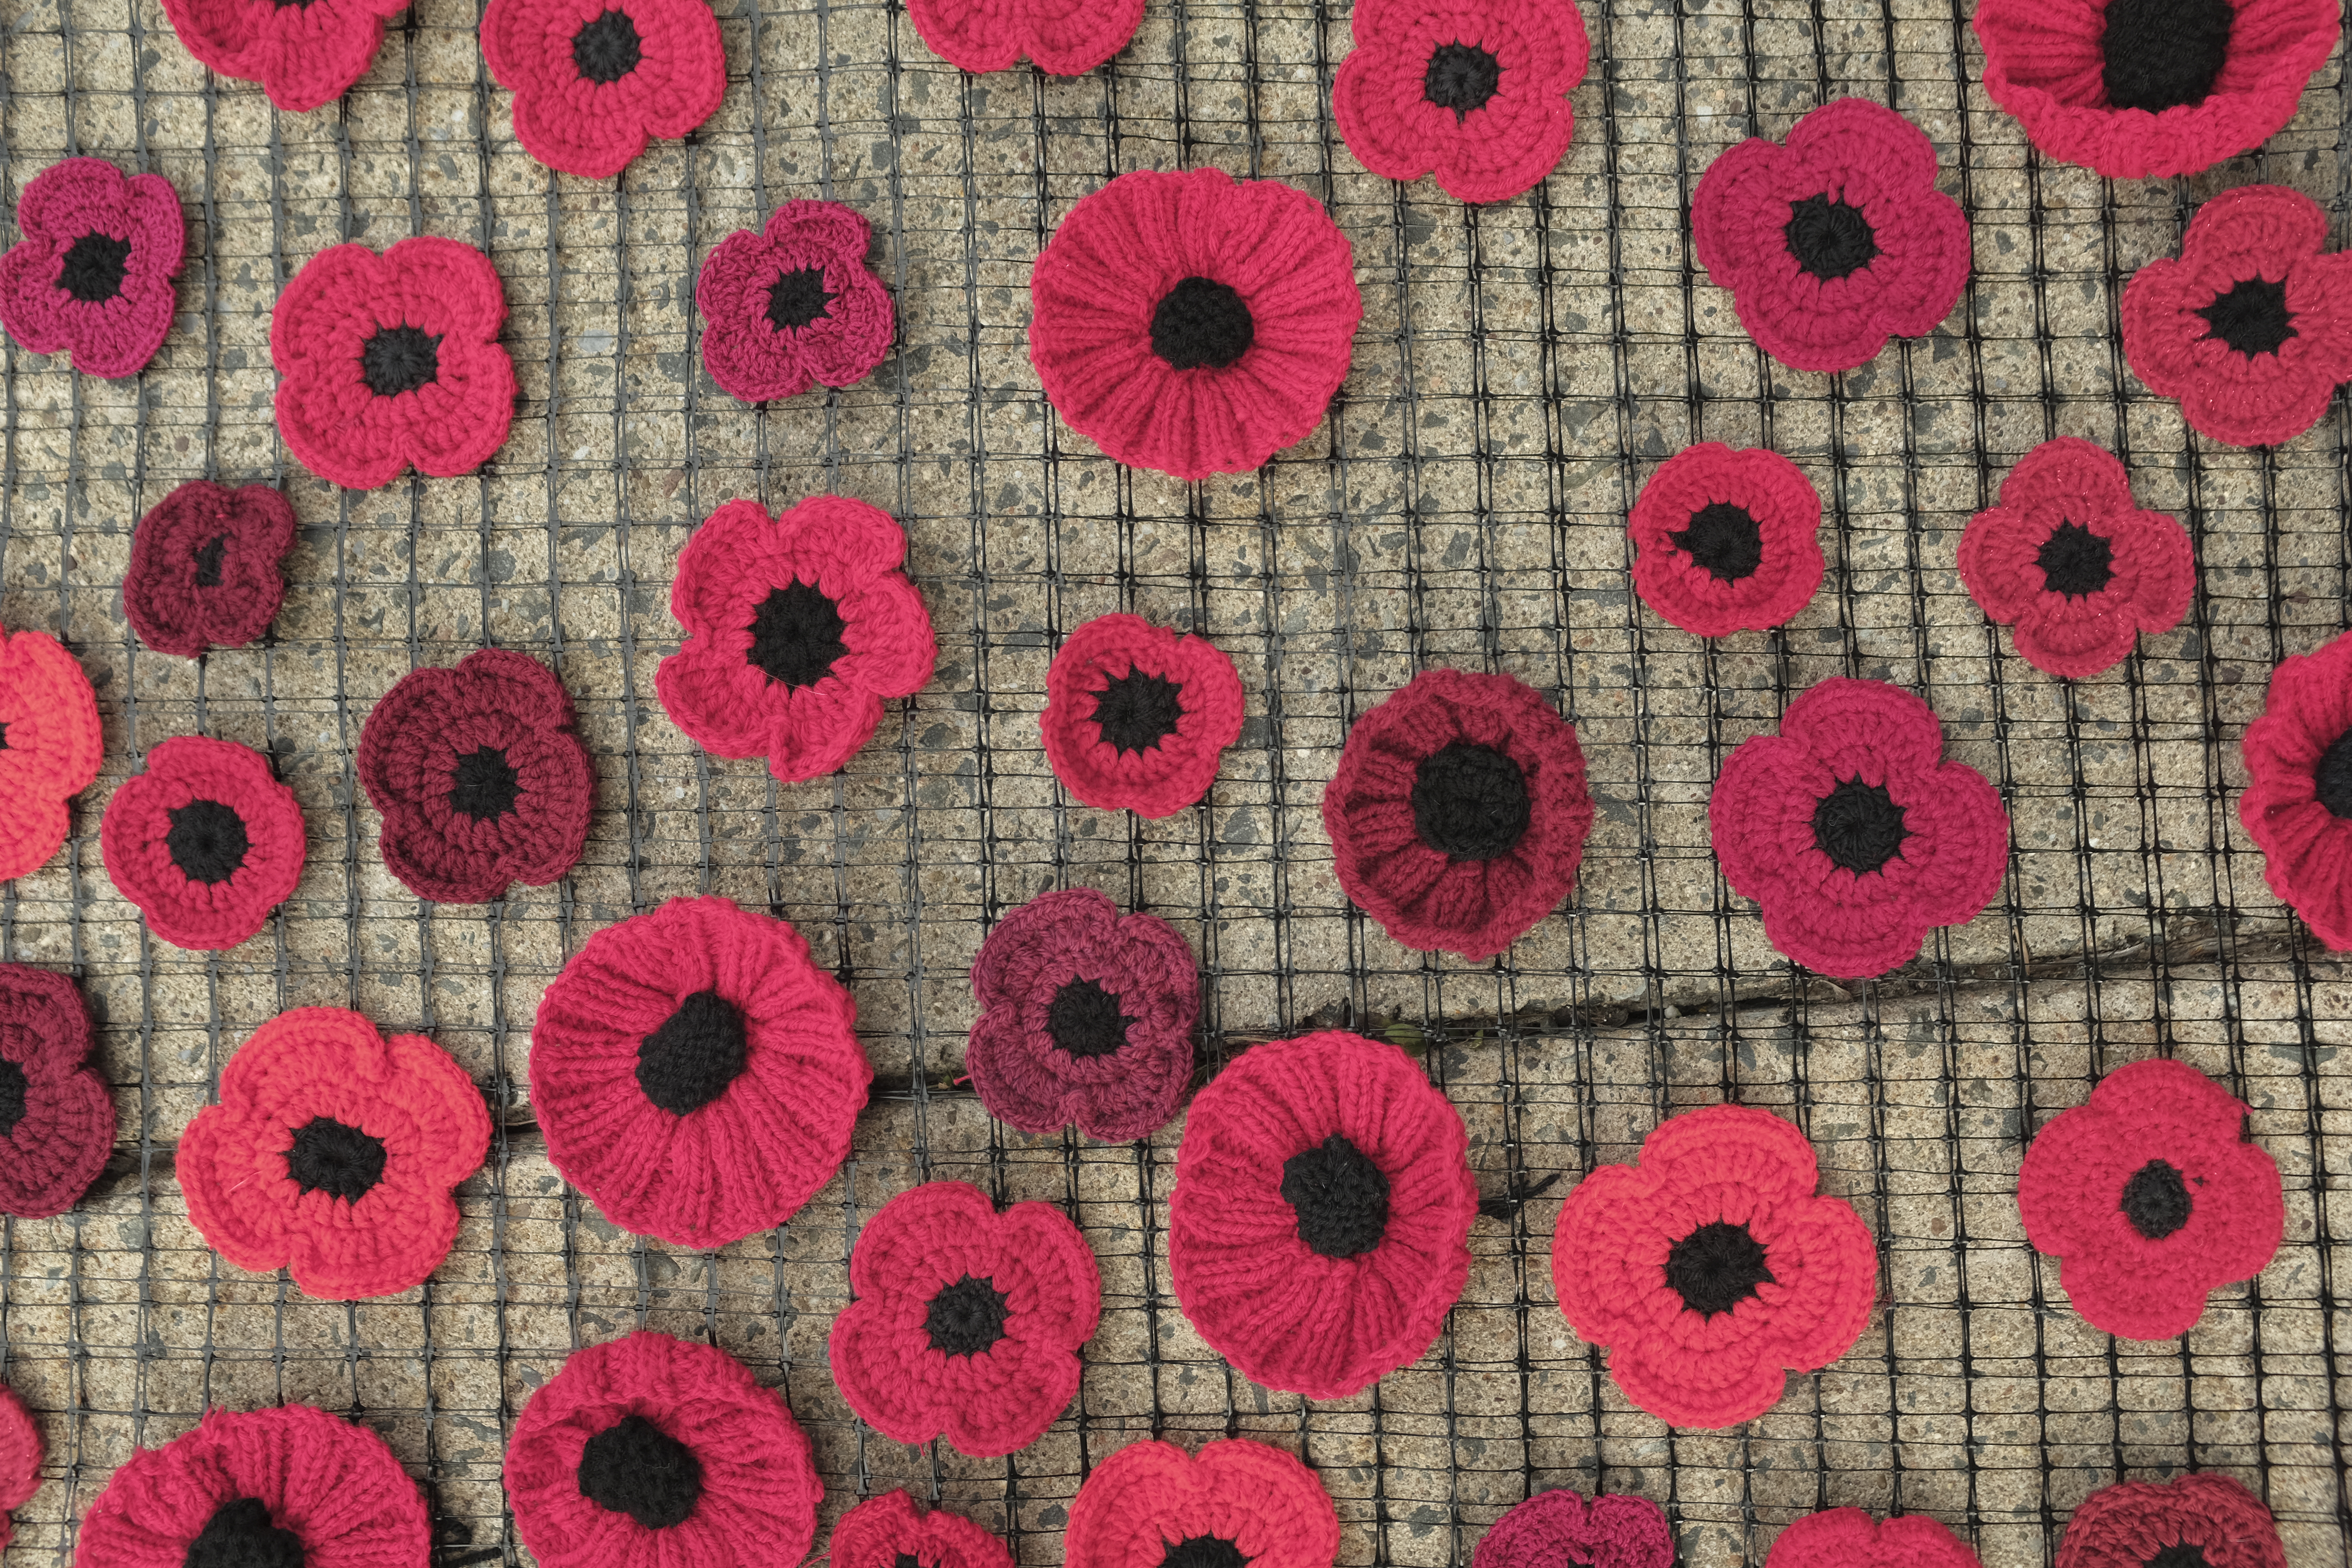 A banner of knit poppies, laying on the ground.